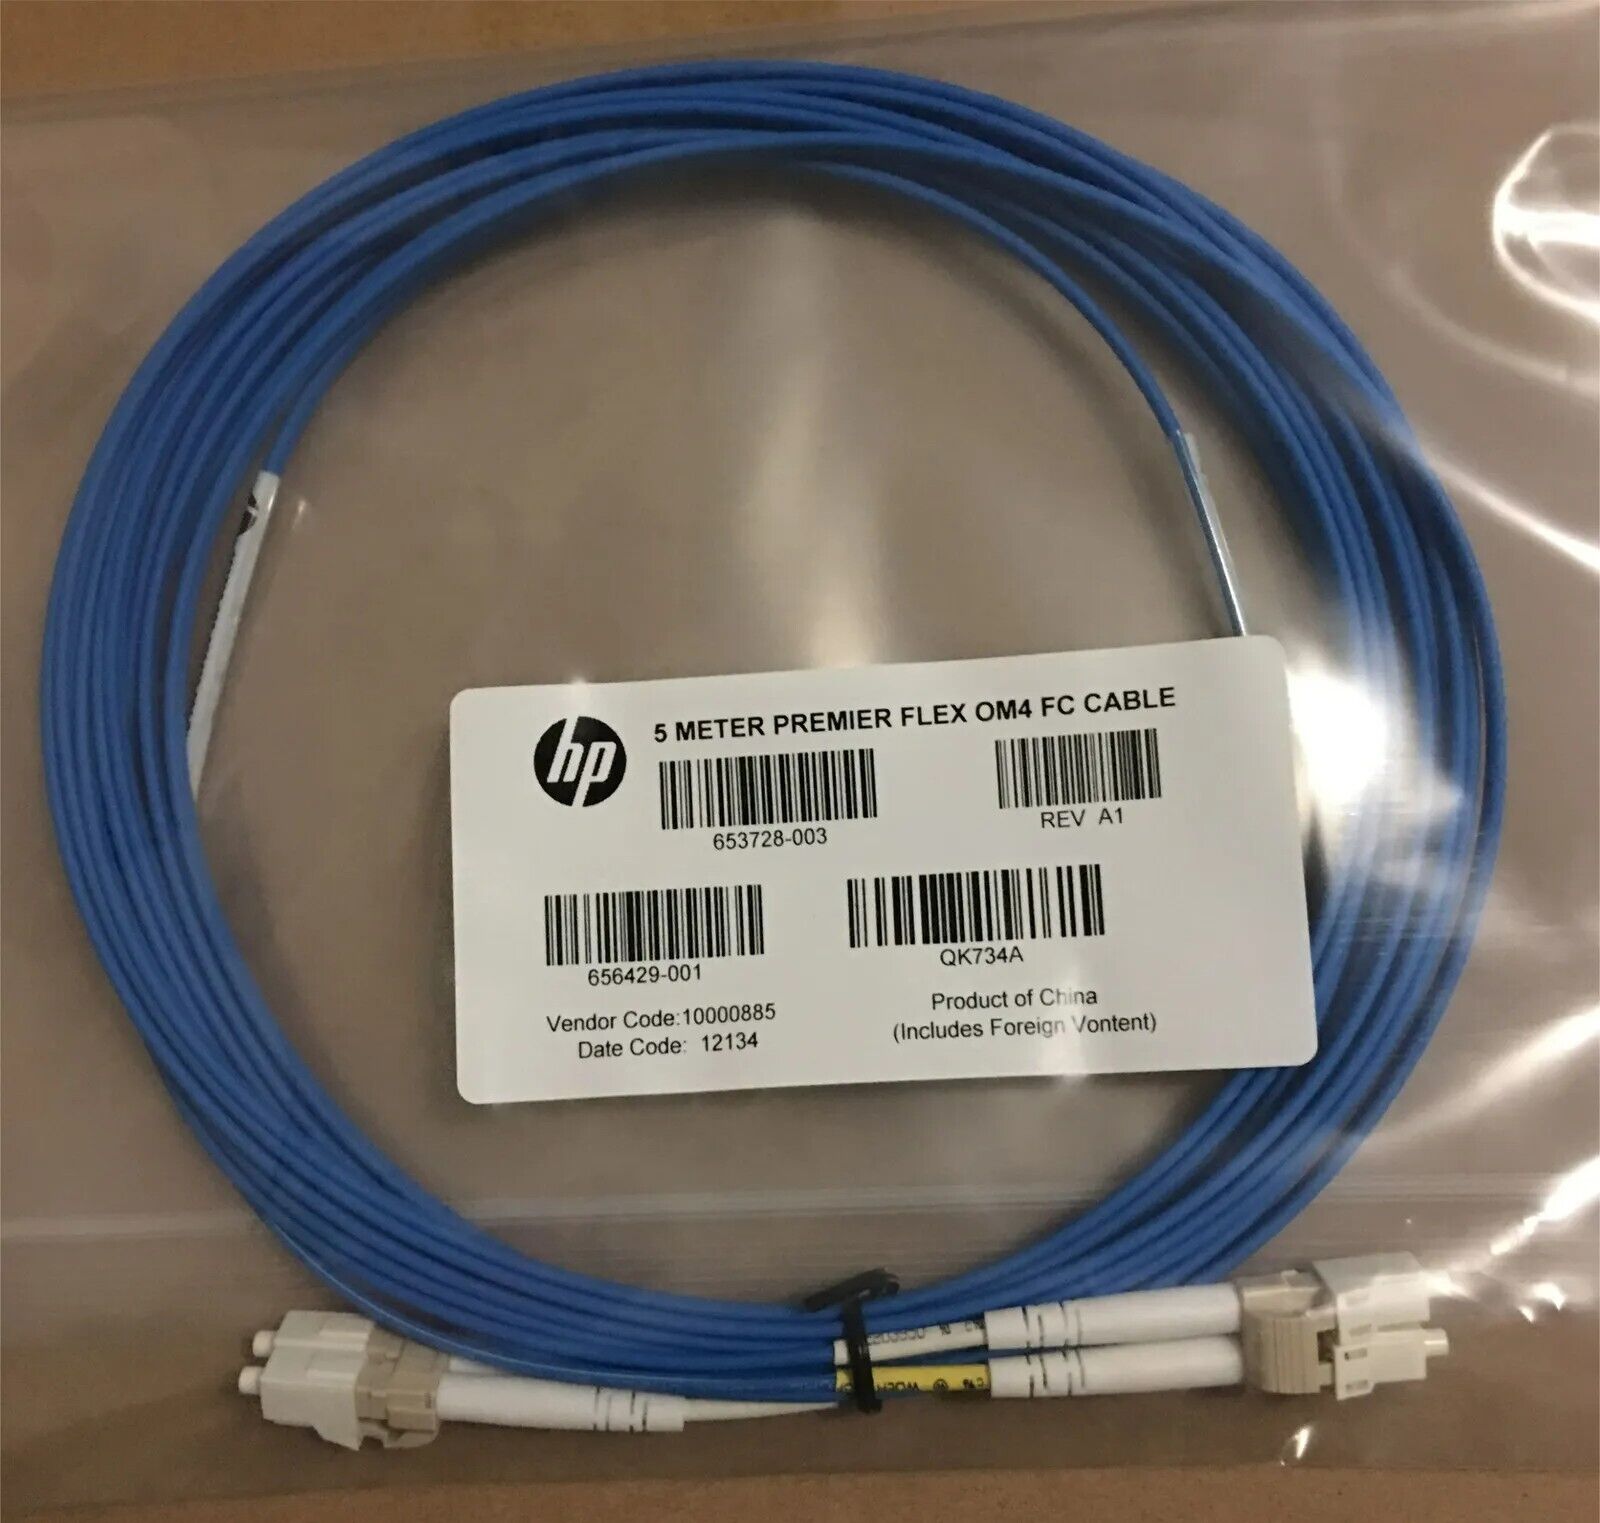 1PCS HPE Flex LC/LC MM OM4 2 Fiber 5M Cable QK734A 656429-001 NEW SEALED SPARE